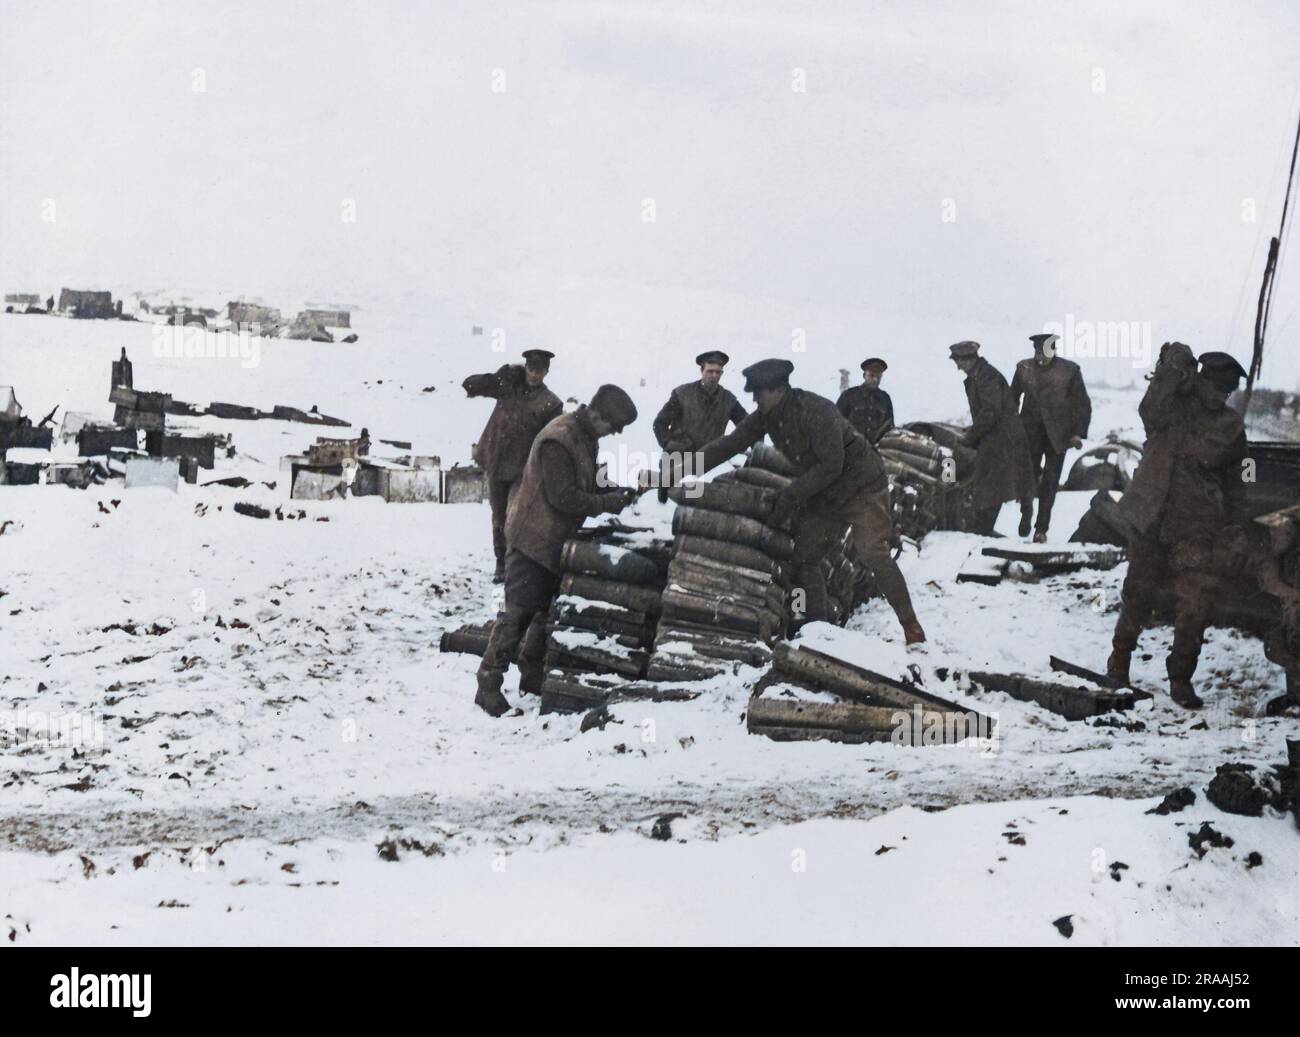 British artillerymen sorting shells in the snow on the Western Front during World War One.     Date: circa 1916 Stock Photo